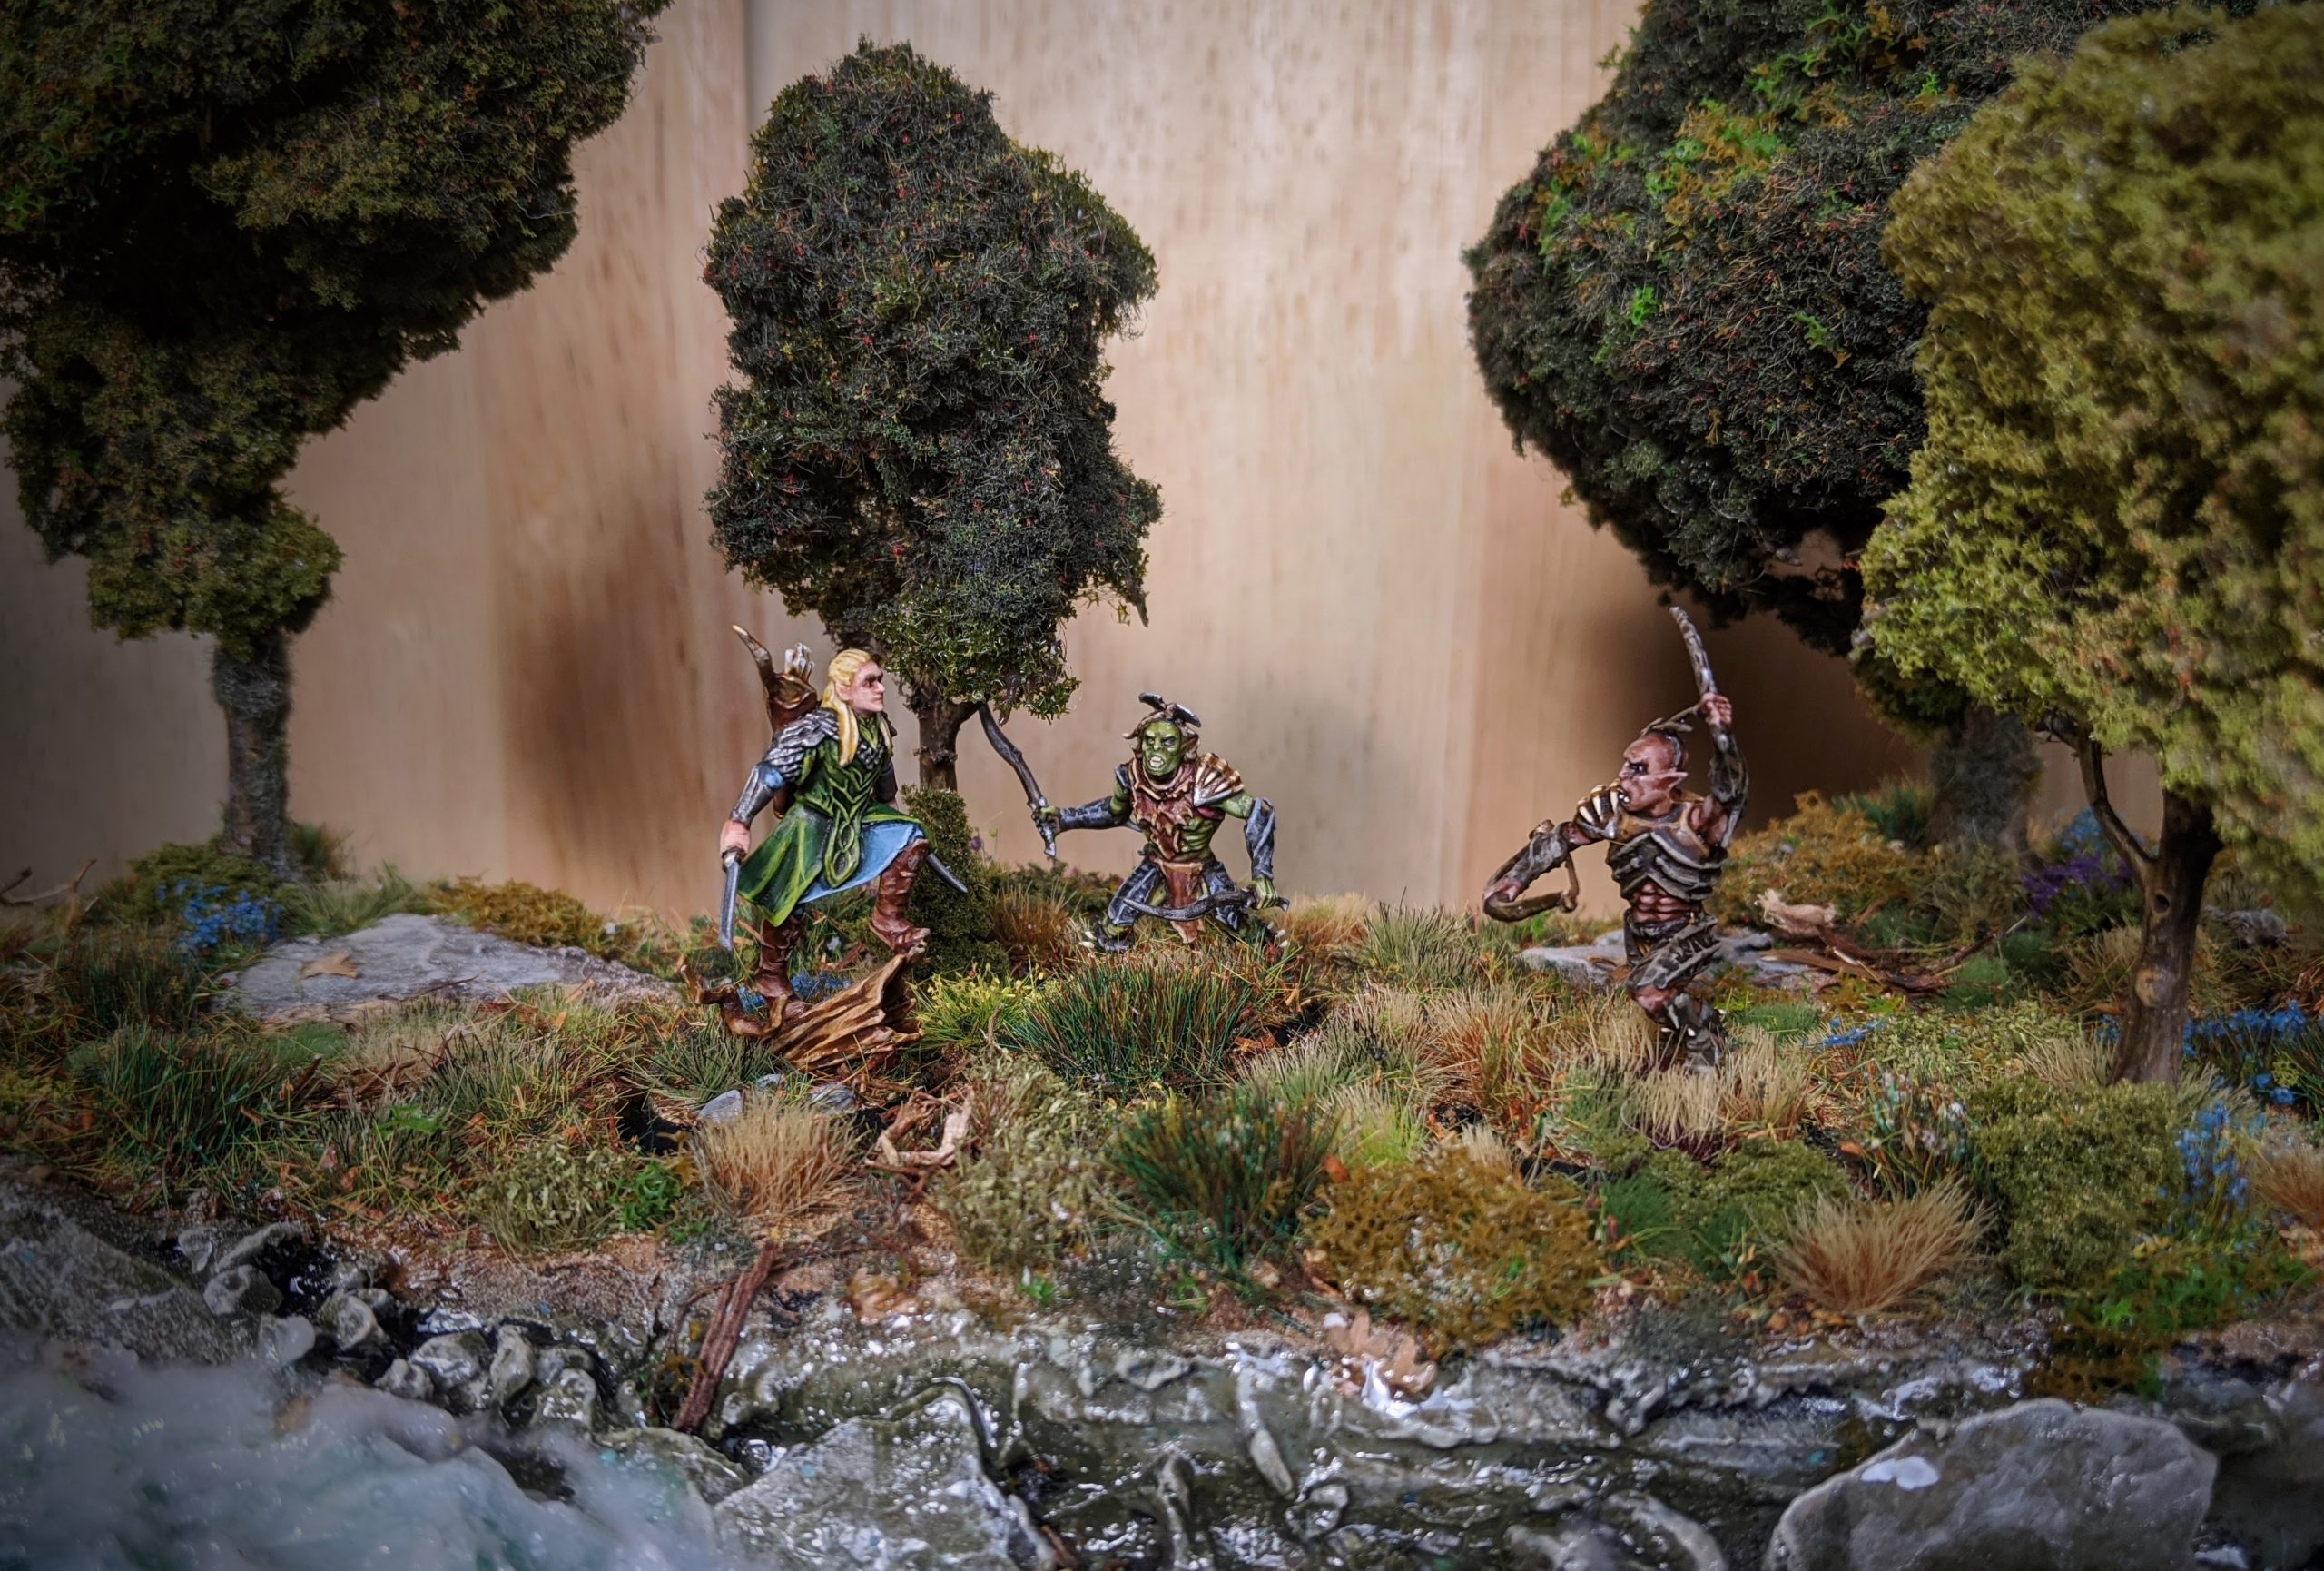 Made this small diorama to try out some static grass layering and